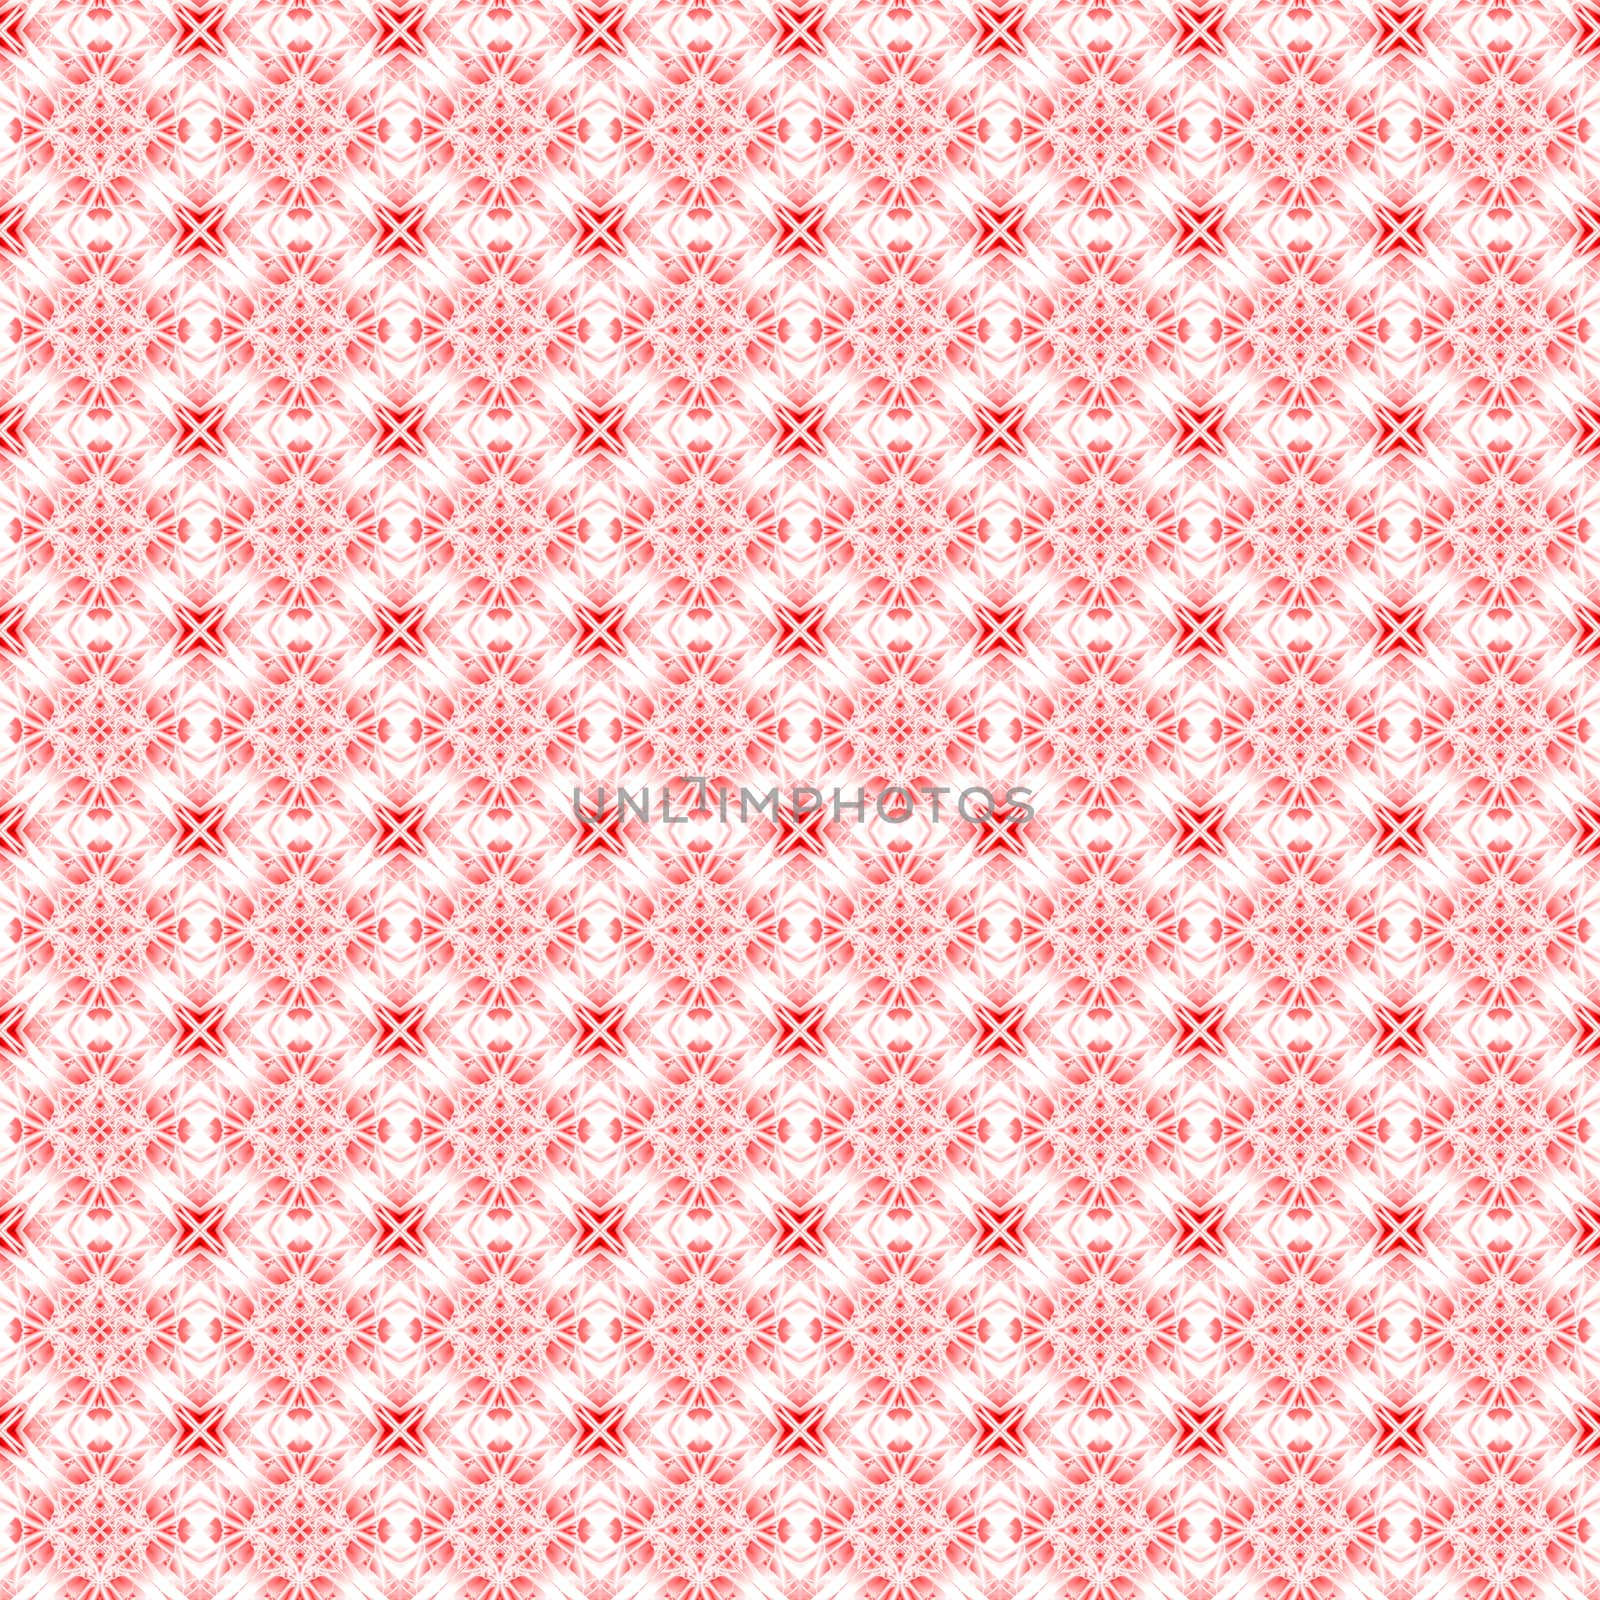 Abstract geometric background for design. For your commercial and editorial use.